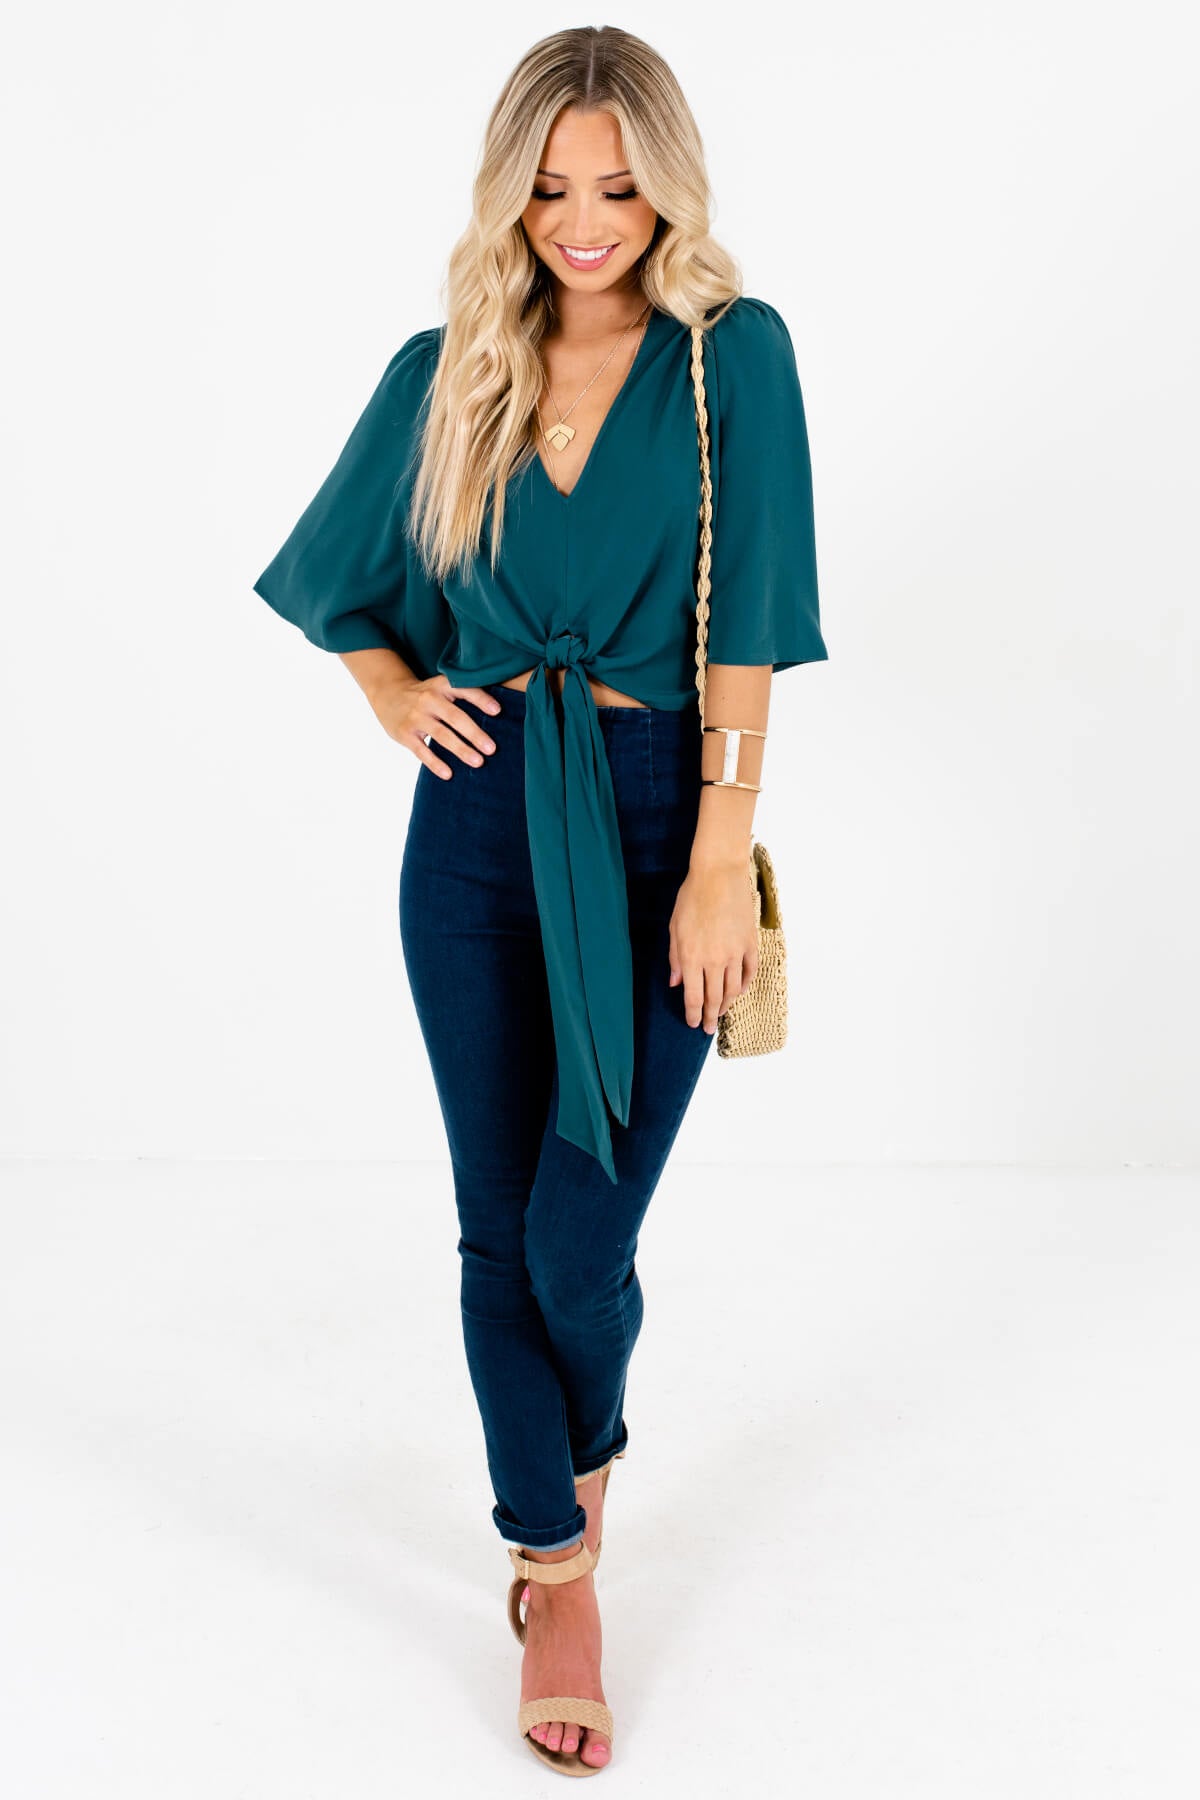 Emerald Green Cute and Comfortable Boutique Tops for Women